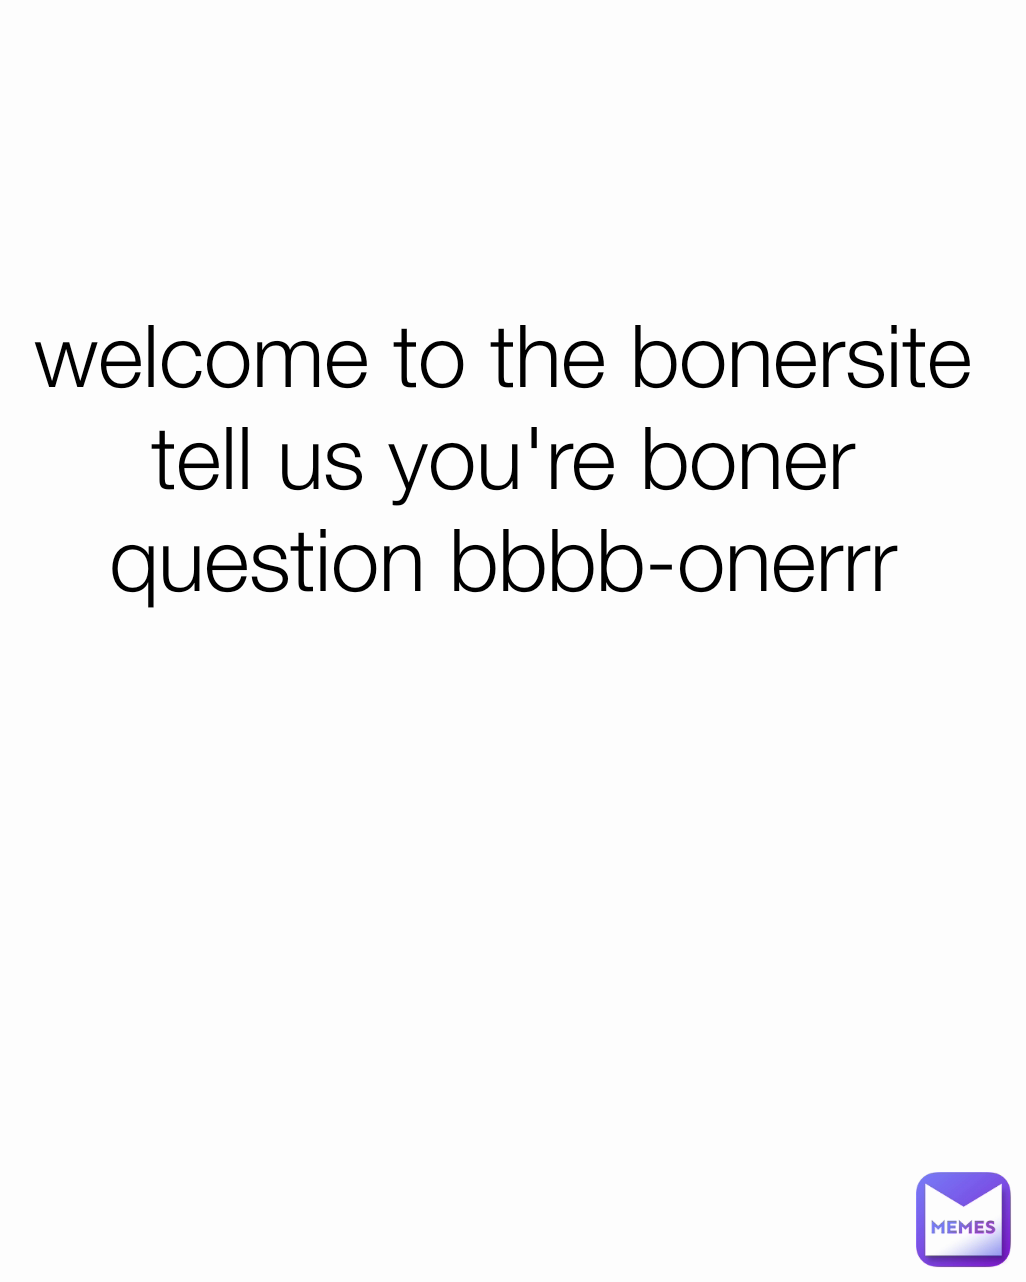 welcome to the bonersite tell us you're boner question bbbb-onerrr